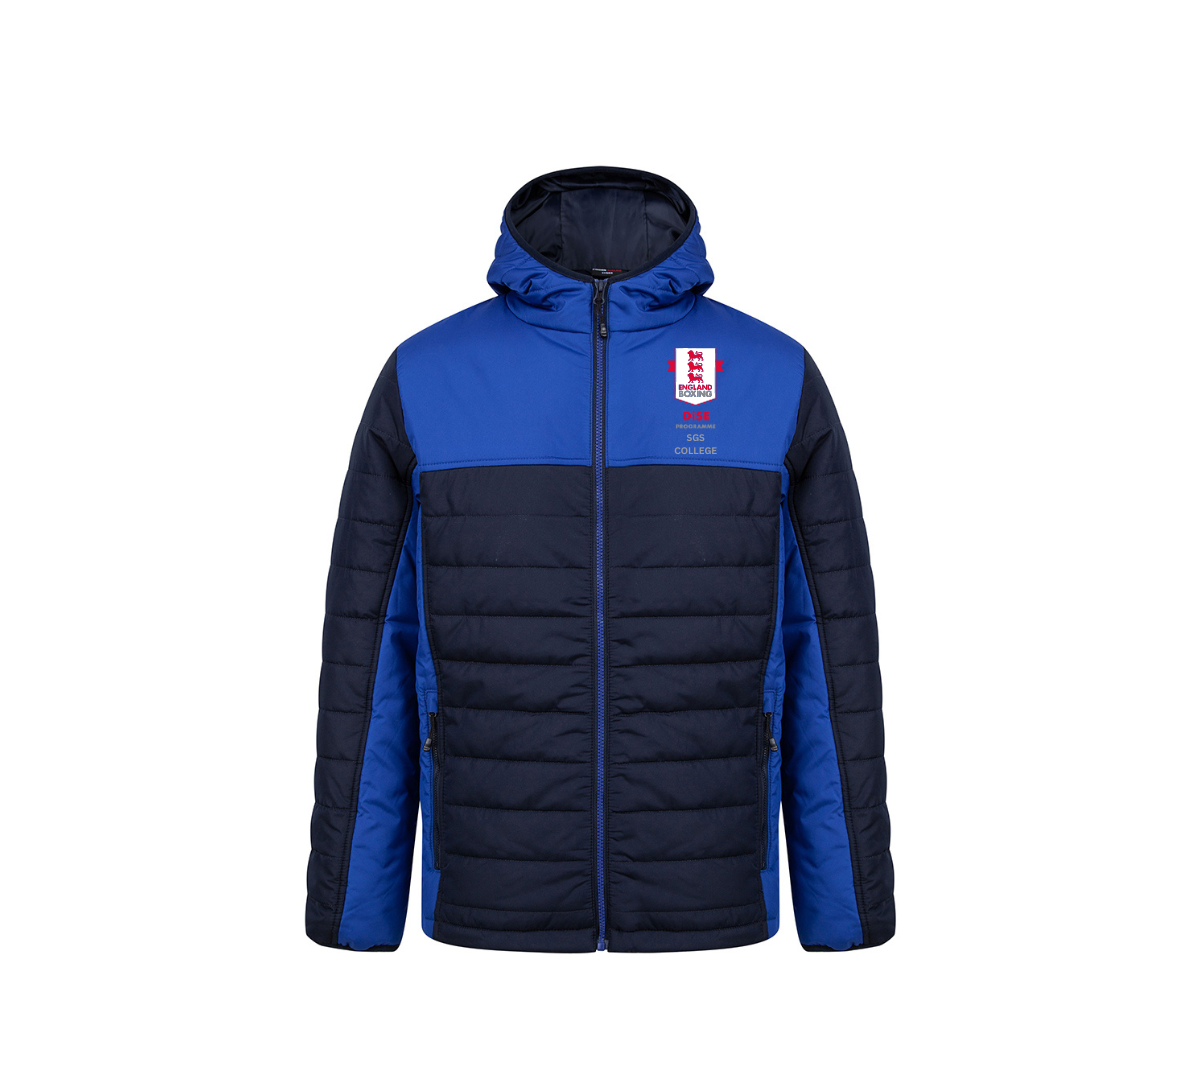 DiSE Programme (SGS College) Padded Jacket